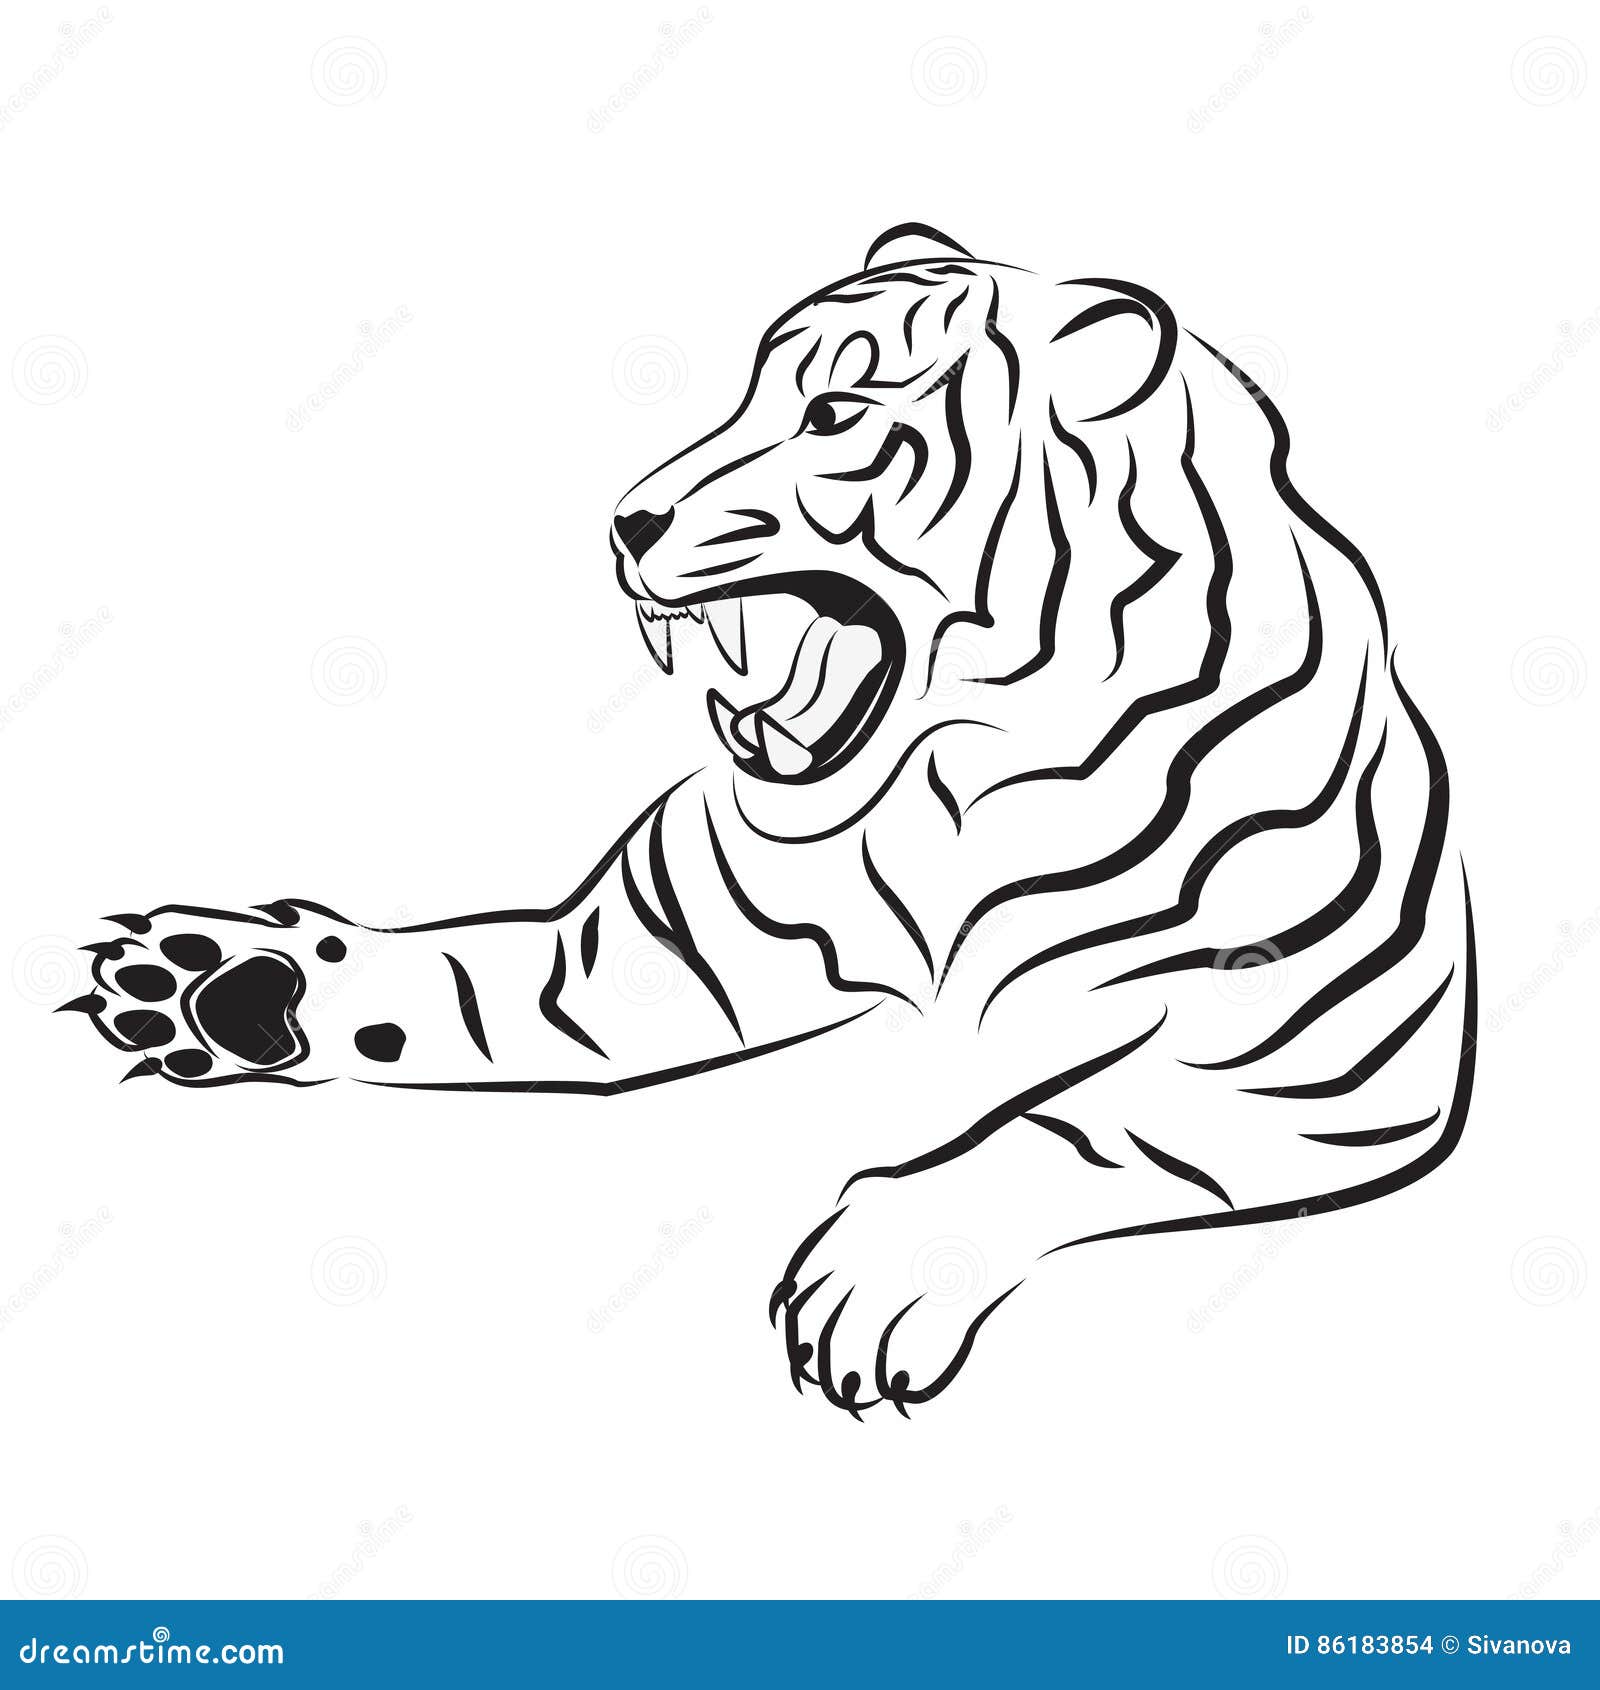 Download wallpapers tiger, fury, wild cats, 4k, vector art, tiger drawing,  tiger eyes, creative art, tiger art, vector drawing, abstract animals, fury  concepts for desktop free. Pictures for desktop free